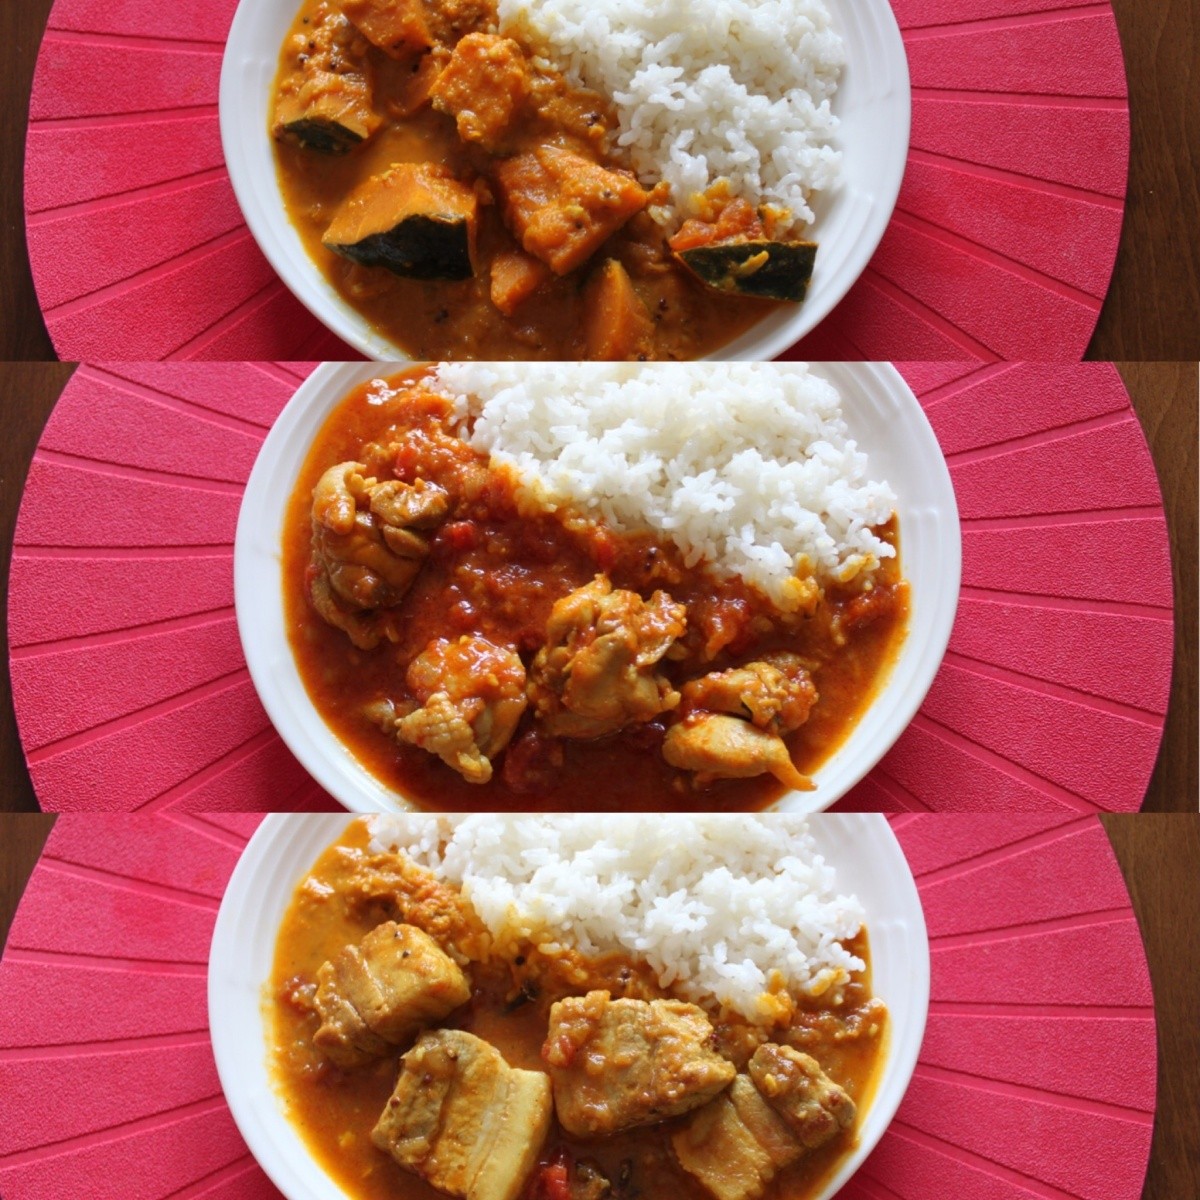 [10 minute . work .. Quick curry ]Dear.Curry free shipping is possible to choose 3 point set 